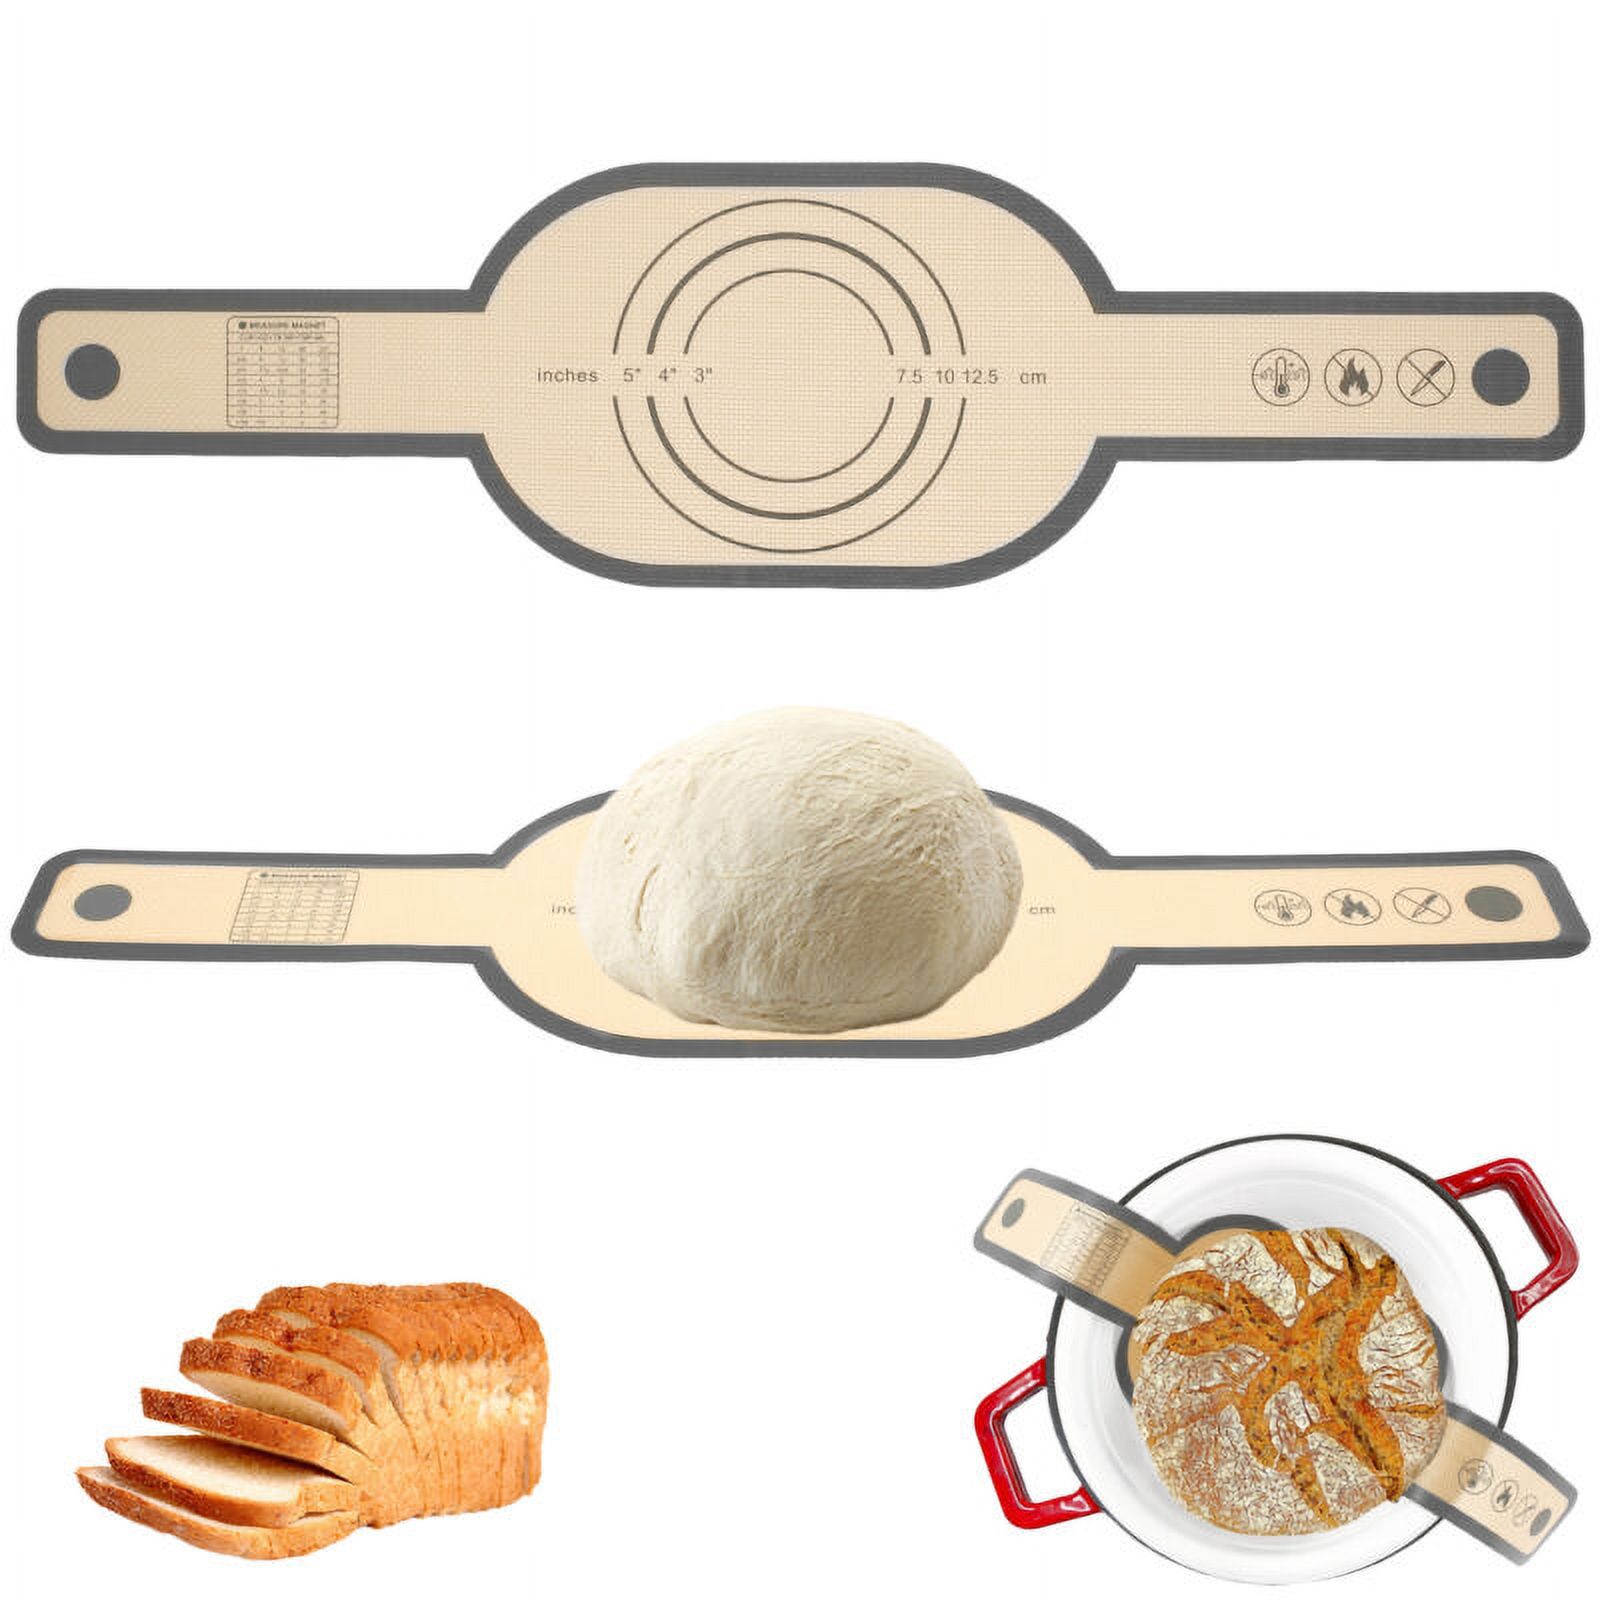 Qenwkxz 2pcs Silicone Bread Sling Non-Stick Silicone Baking Mat Sling Heat Resistant Silicone Dutch Oven Liner with Long Handle Reusable Silicone Bread Mat Sheets for Transfer Dough Baking - image 5 of 11